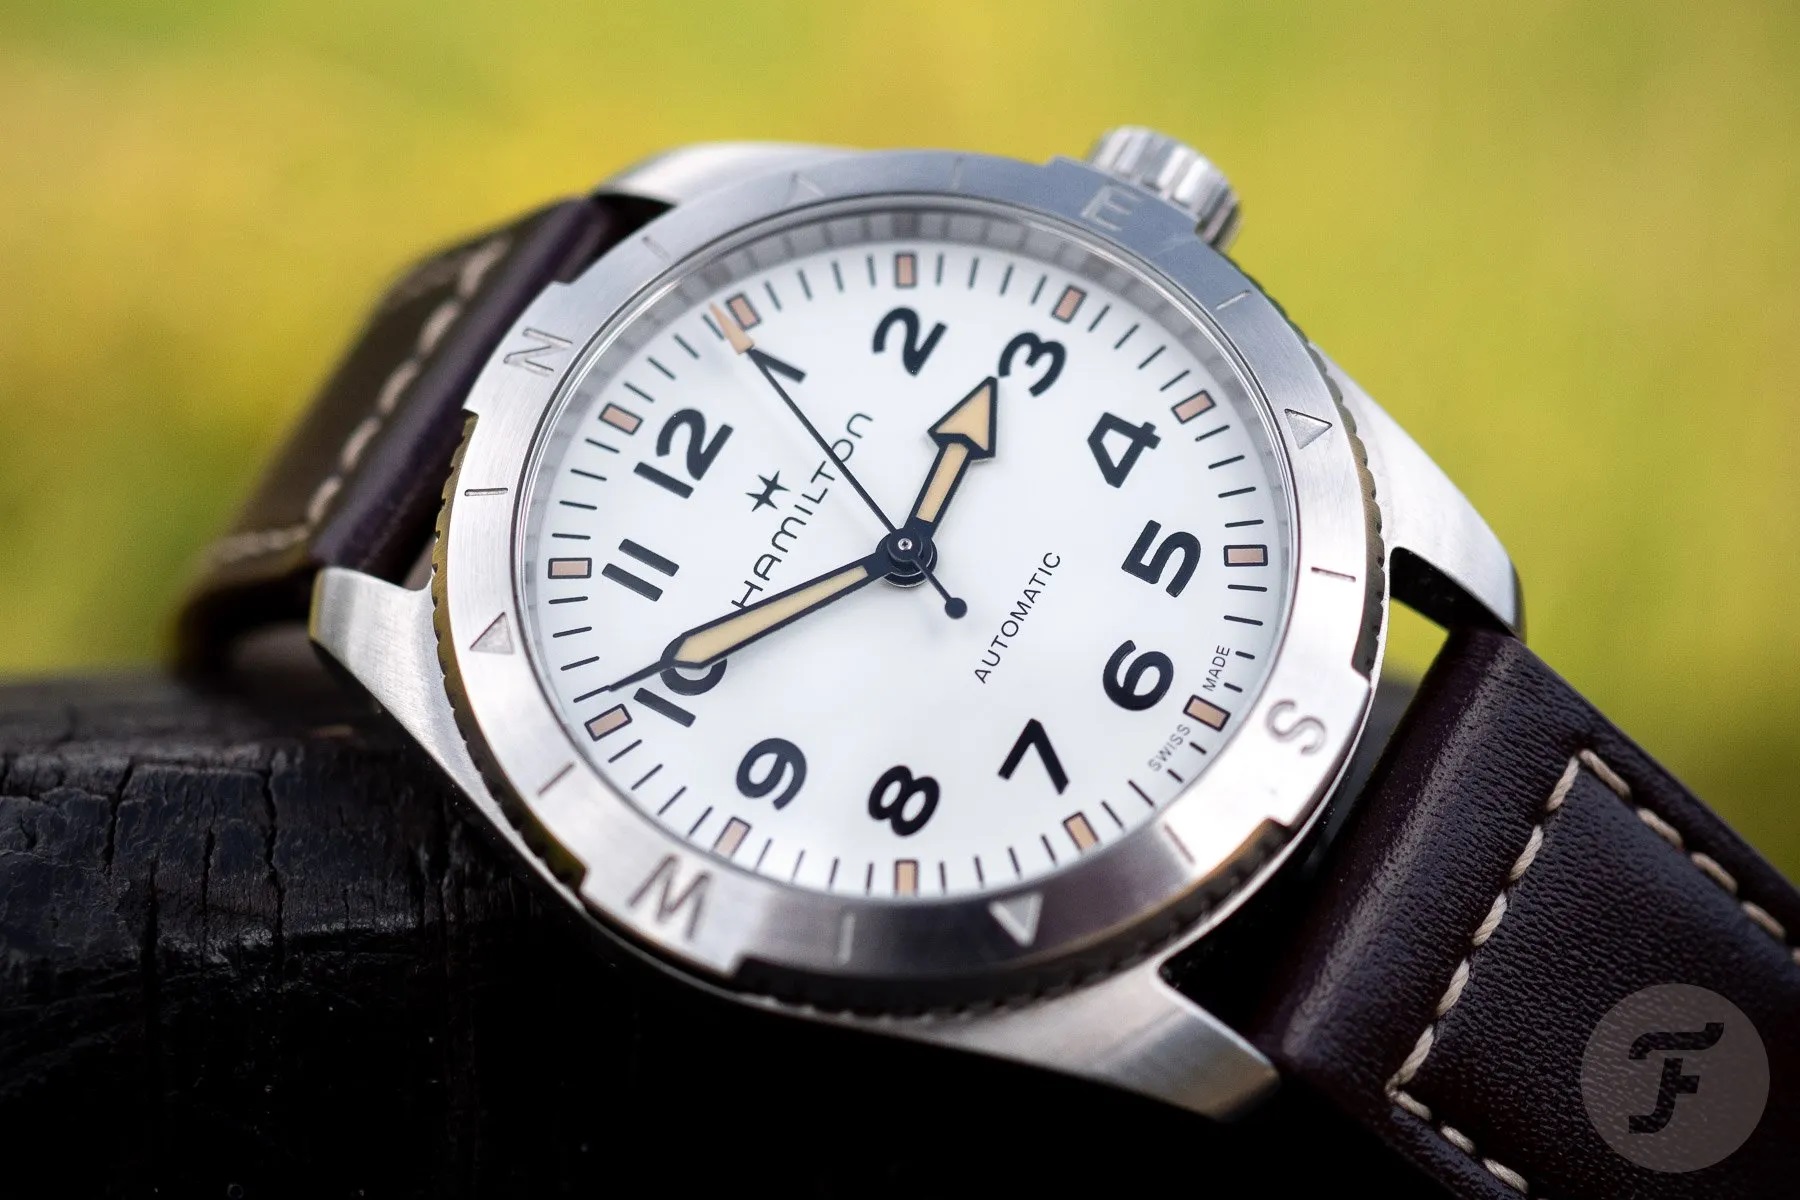 Hands-On With The Ball Roadmaster Vanguard Tritium Watch